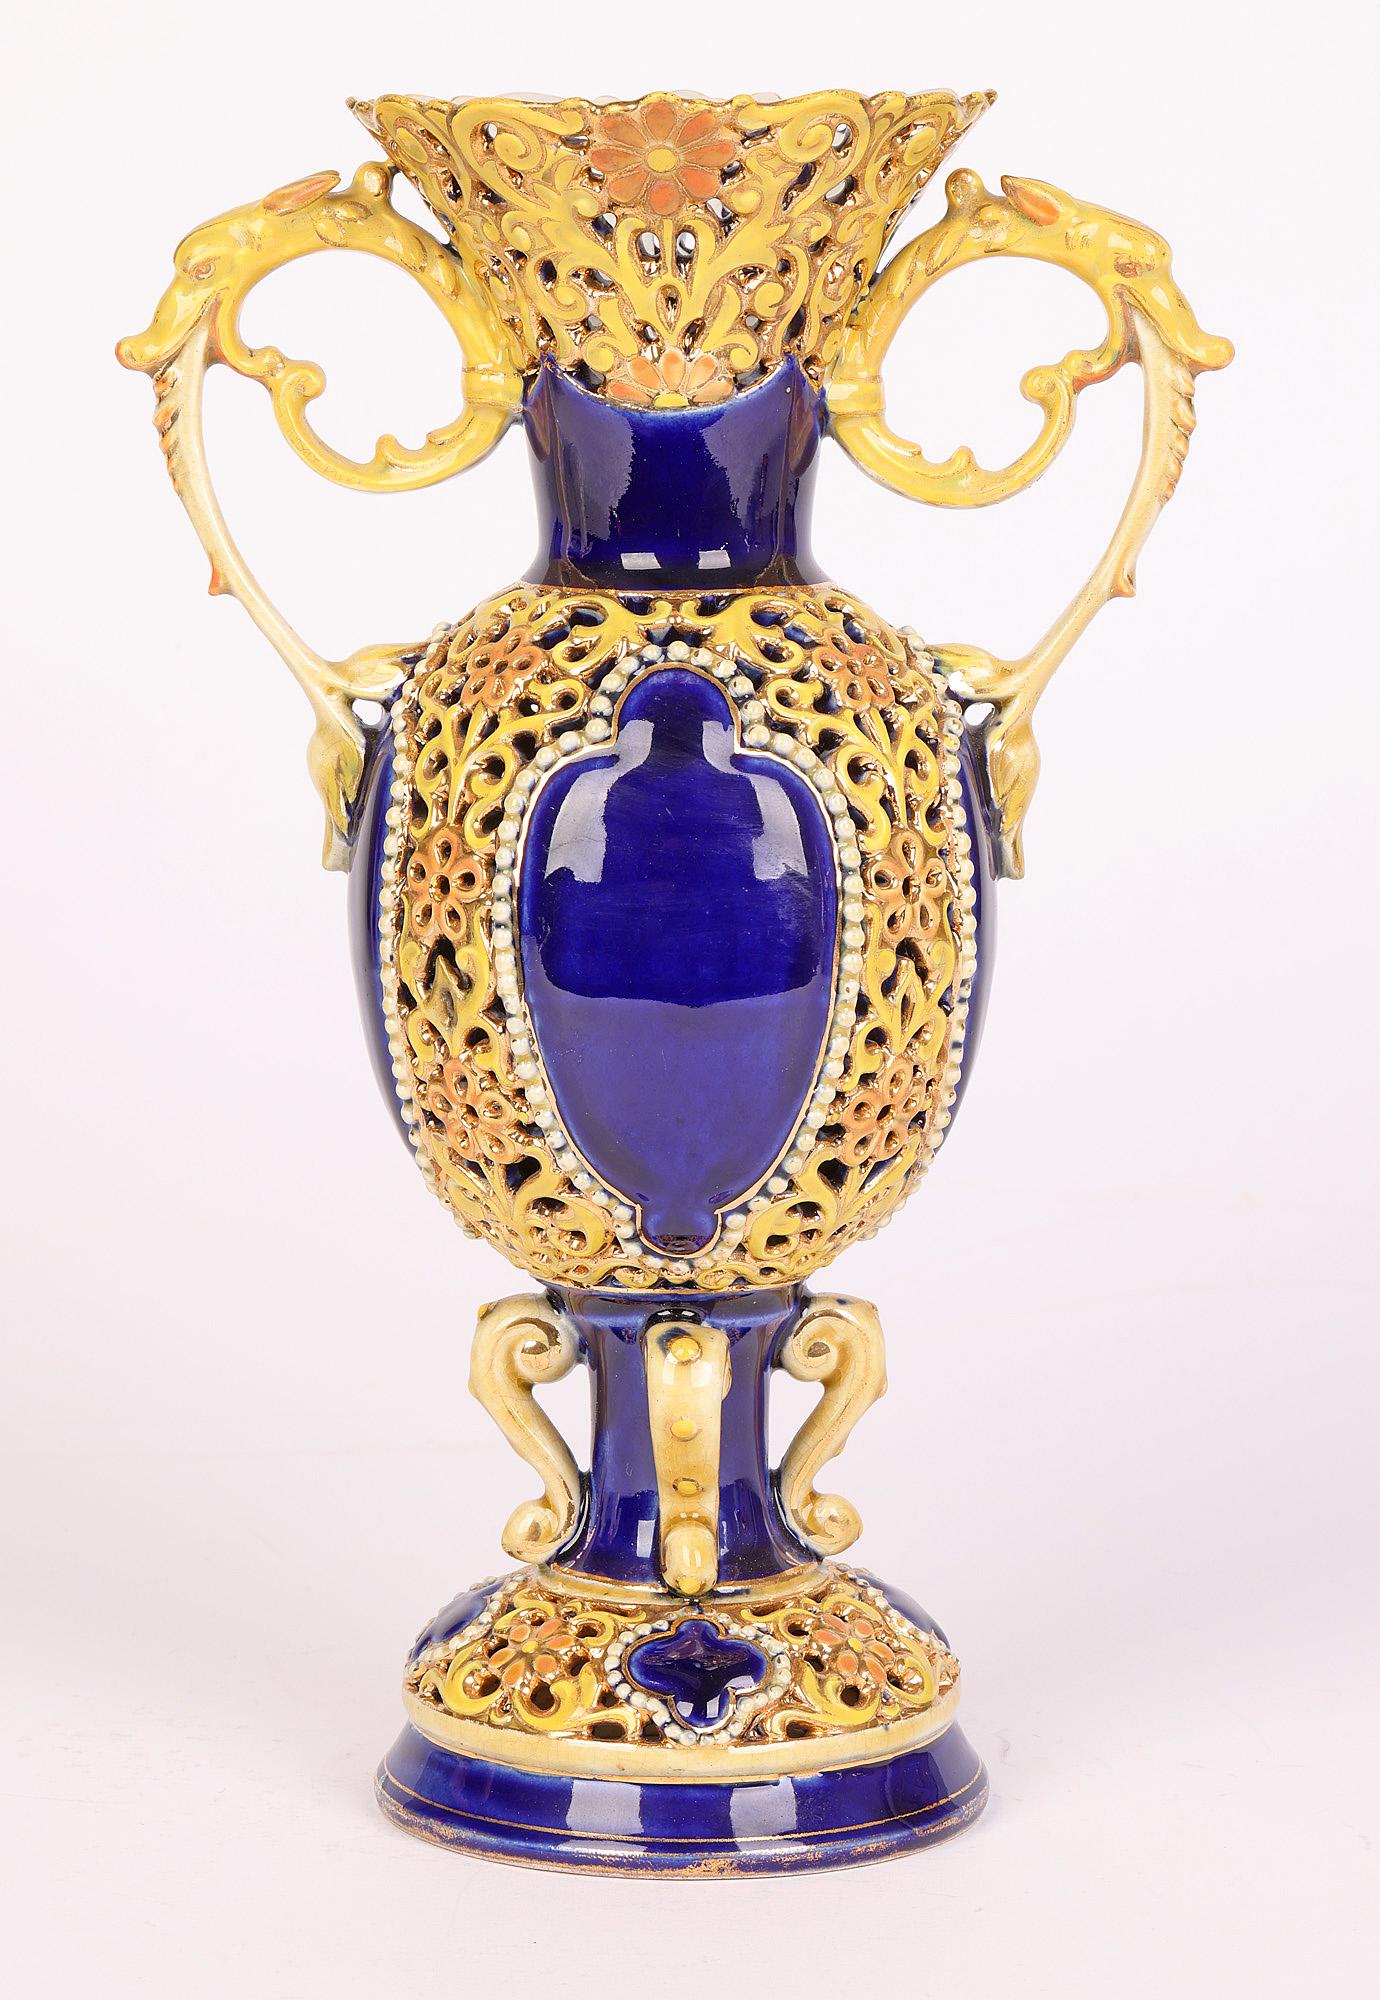 Art Nouveau Zsolnay Hungarian Floral Reticulated Porcelain Vase with Cobalt Blue Panels For Sale